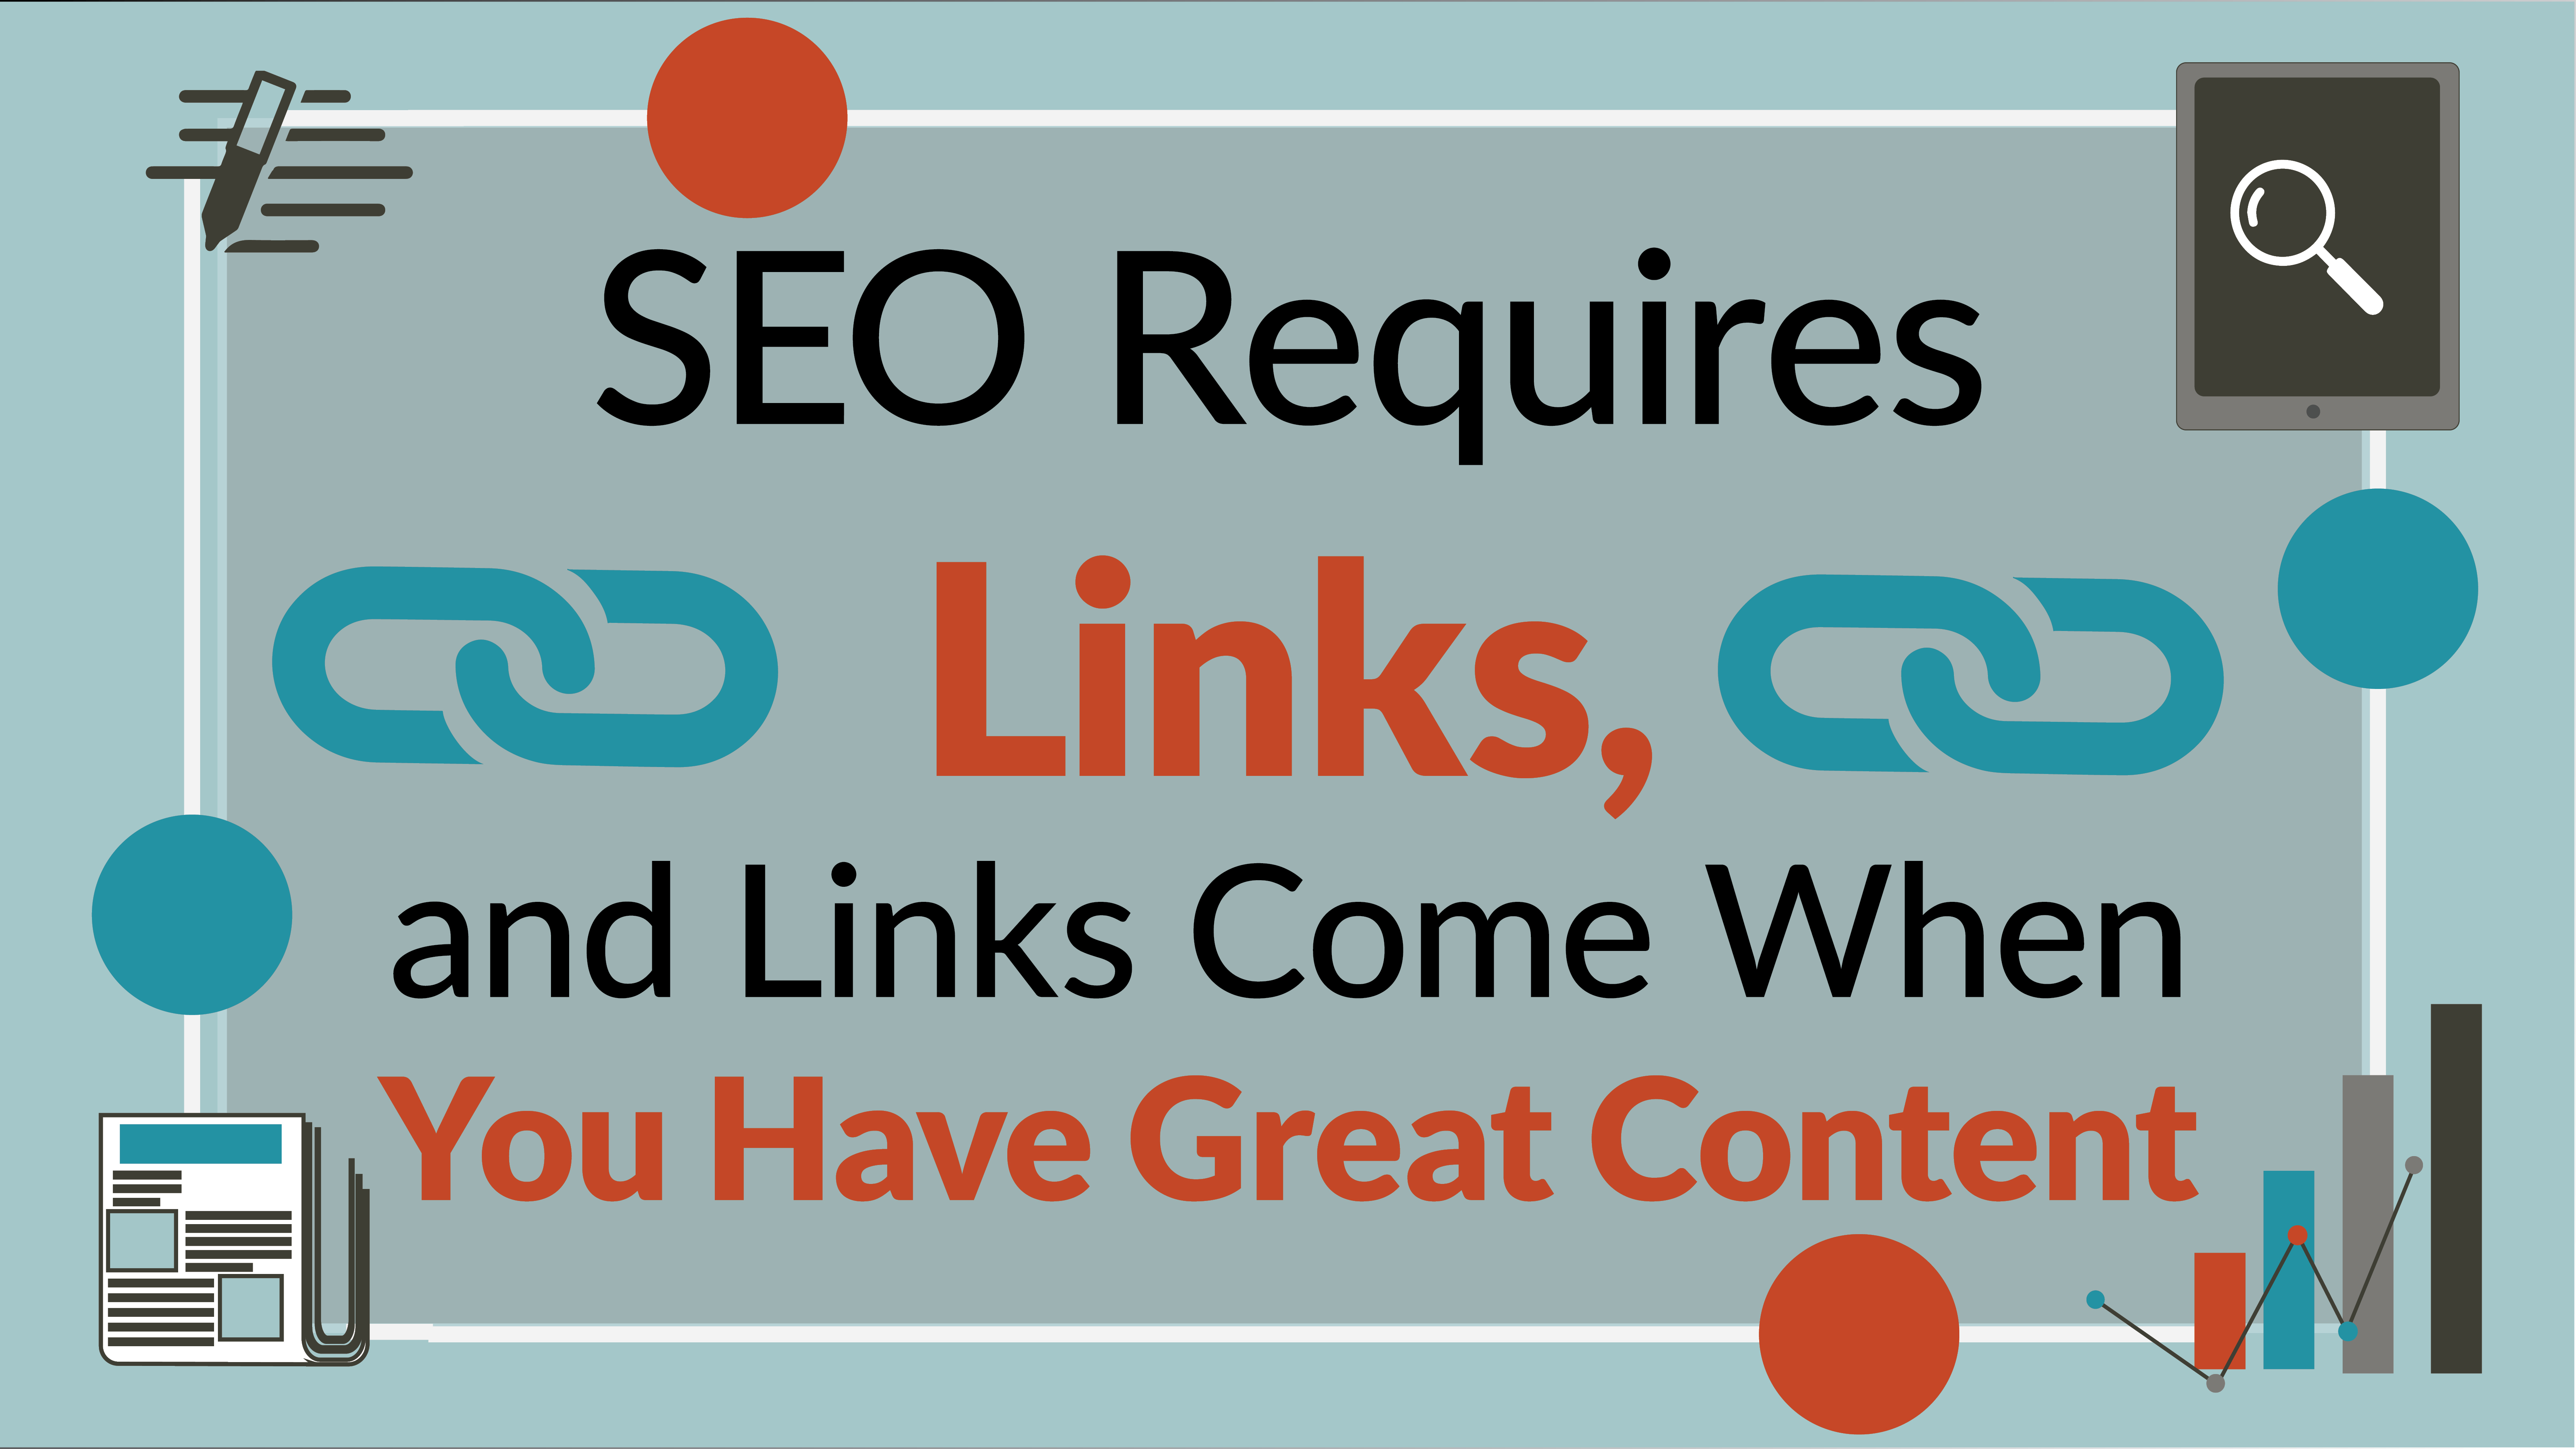 SEO Requires Links, and Links Come When You Have Great Content